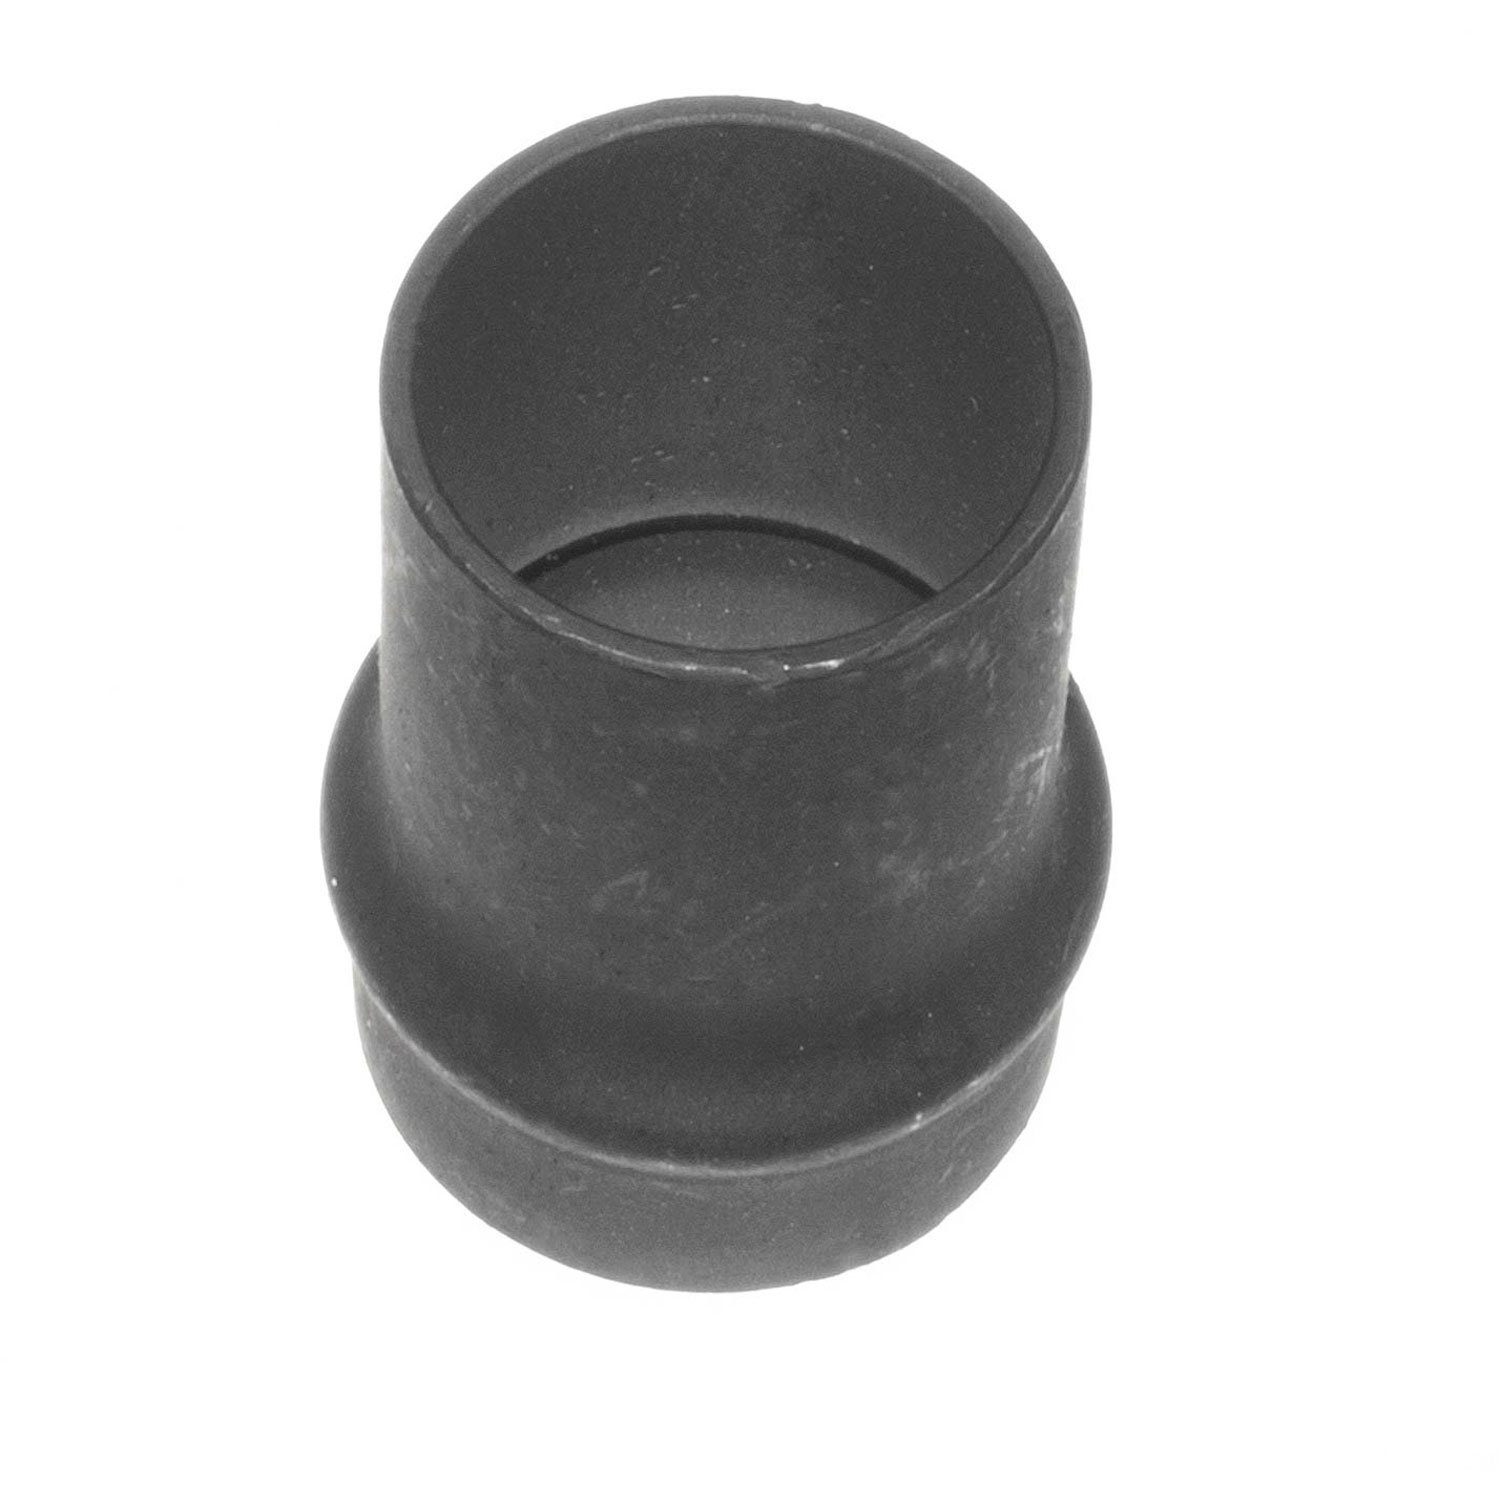 Crush Sleeve For Use With GM 8.2" (10 Bolt) Installation Kits